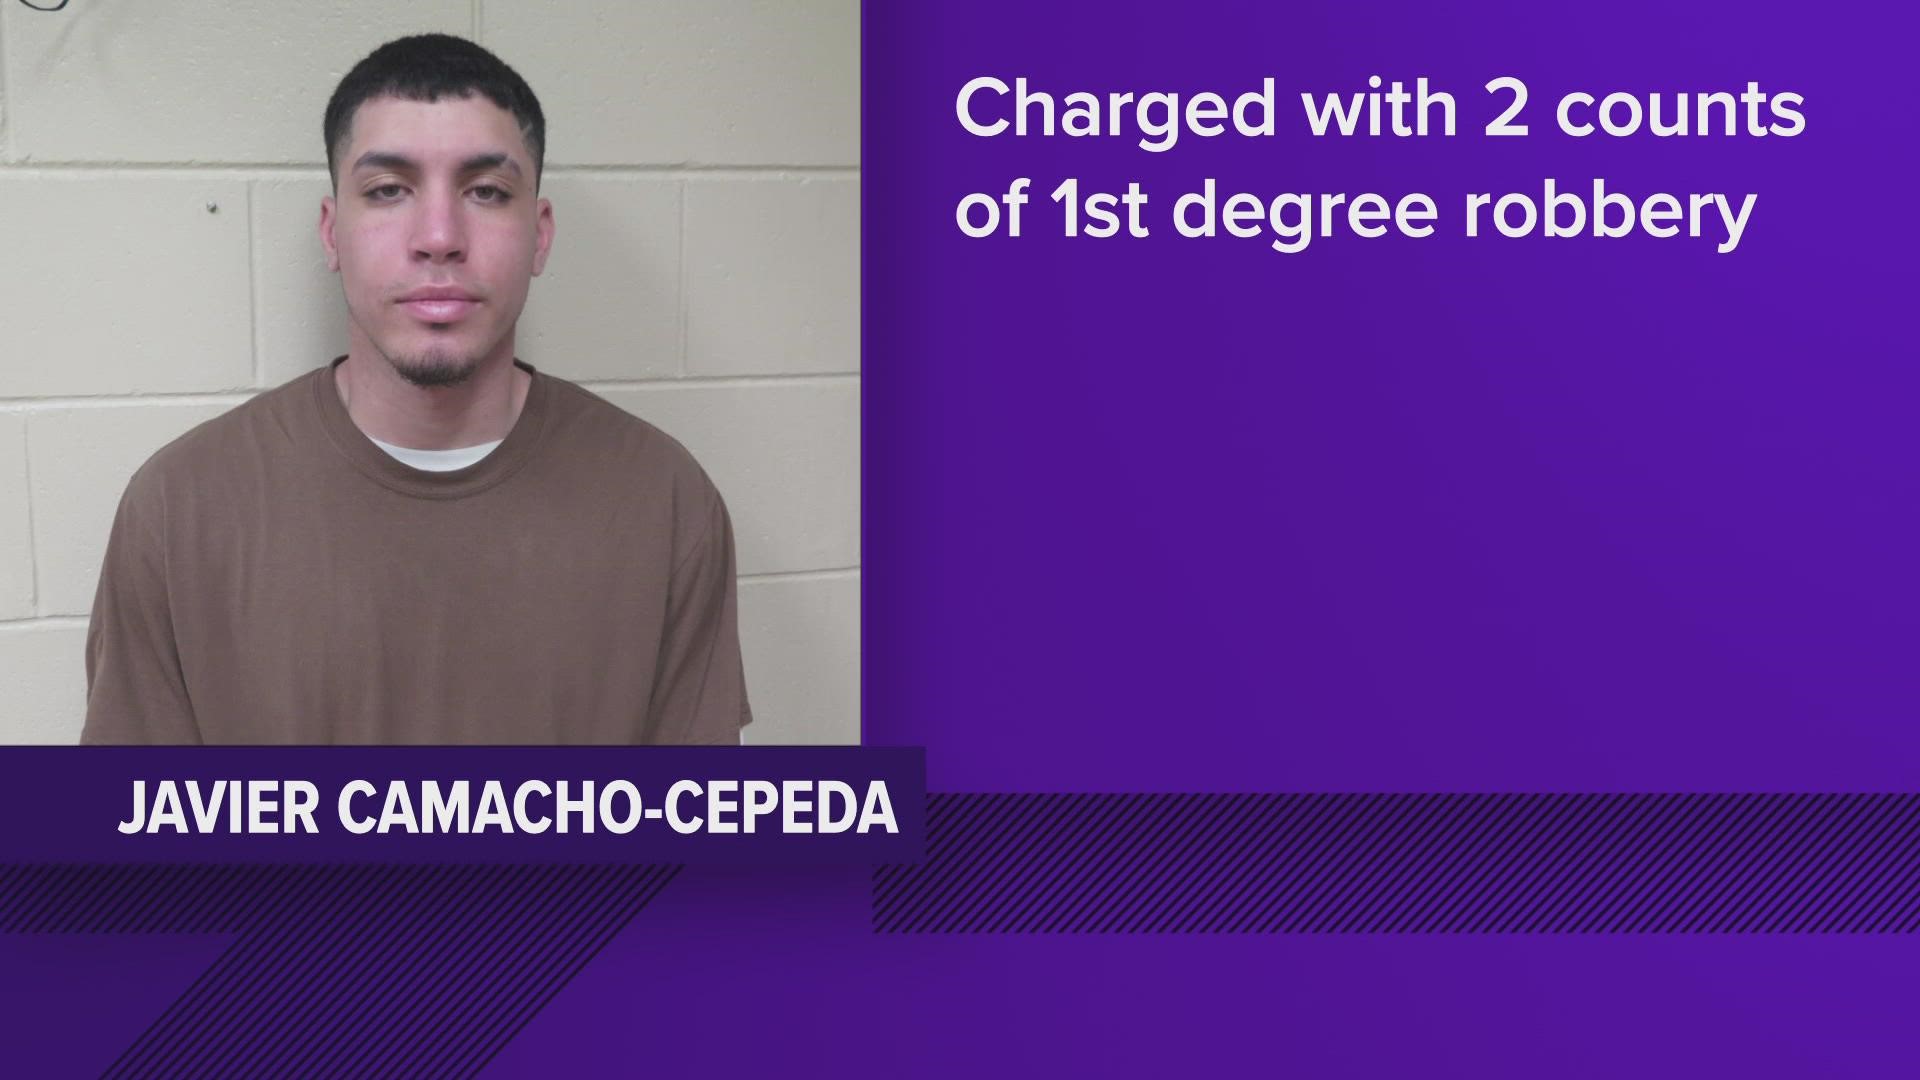 22-year-old Javier Rafael Camacho-Cepeda of Bradenton, Fla. was stopped and arrested in Lake County, Minn., after robbing a bank and stealing an Uber in Des Moines.